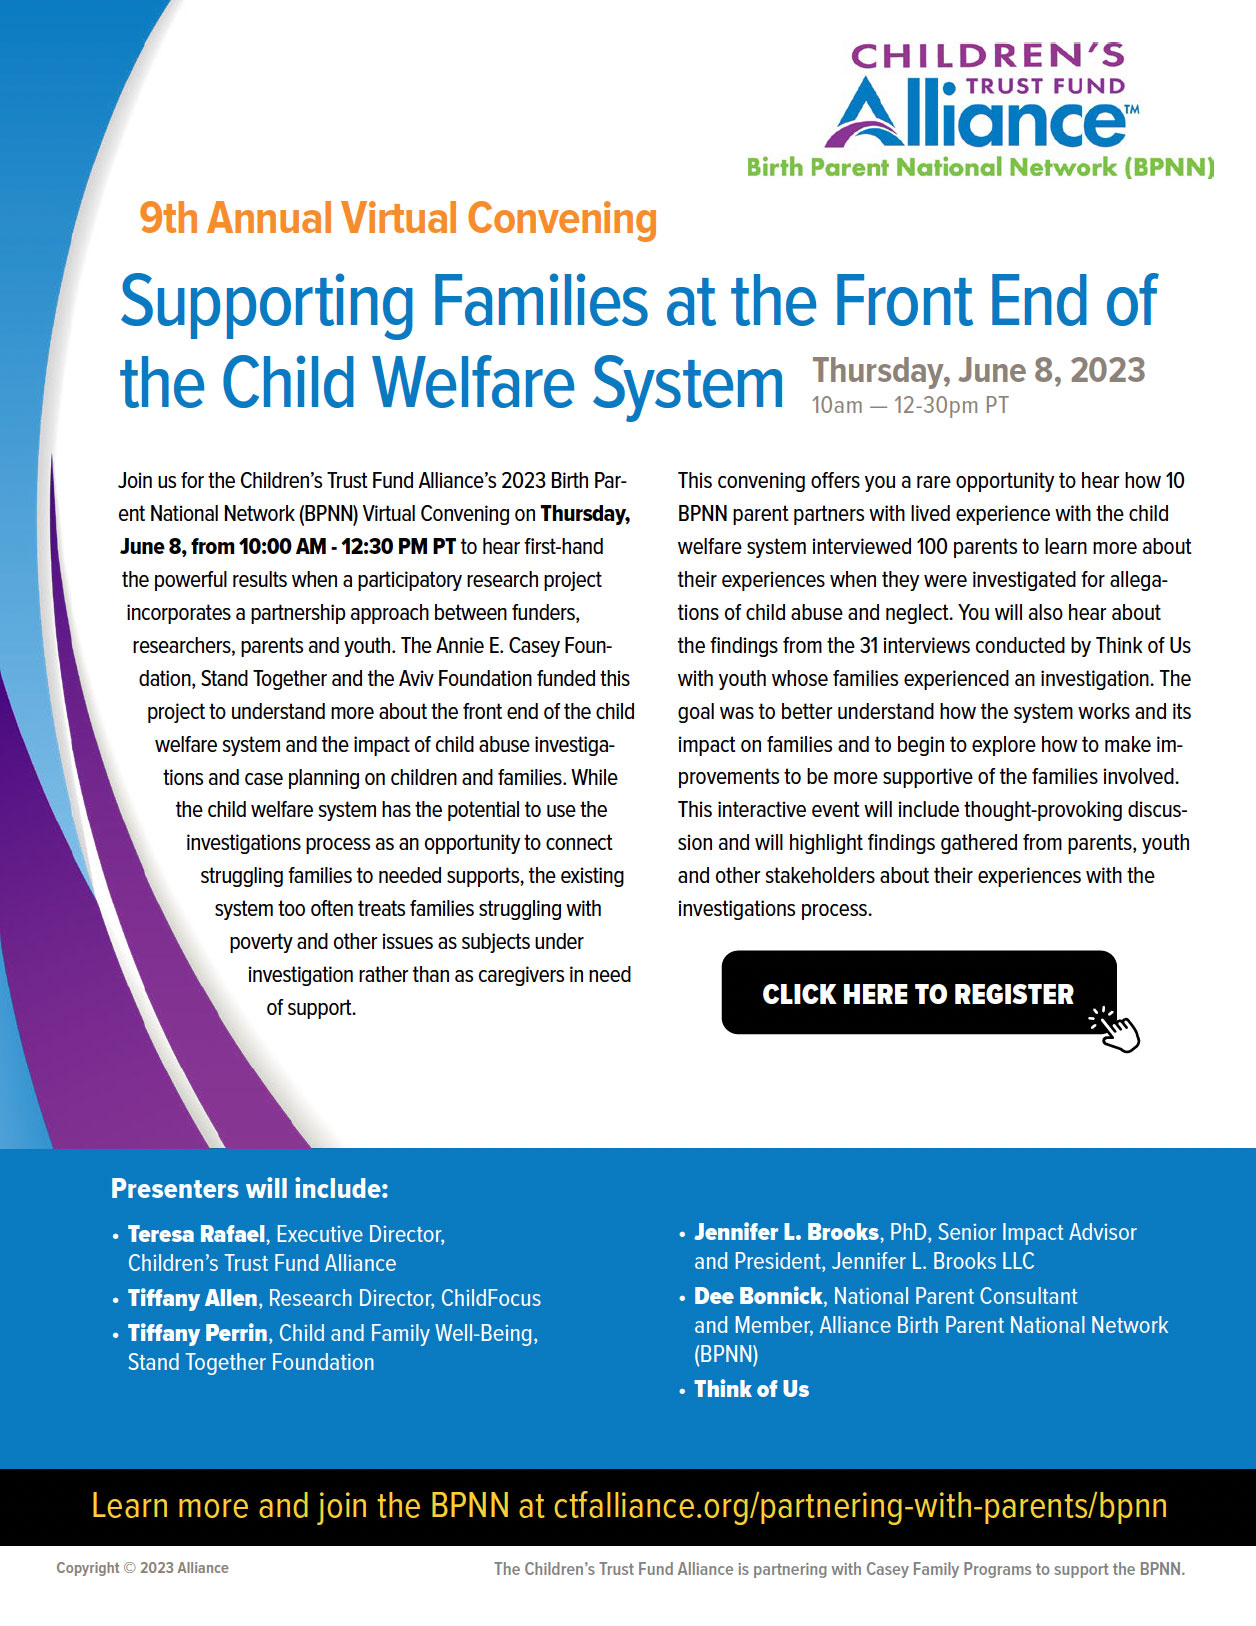 Supporting Families at the Front End of the Child Welfare System